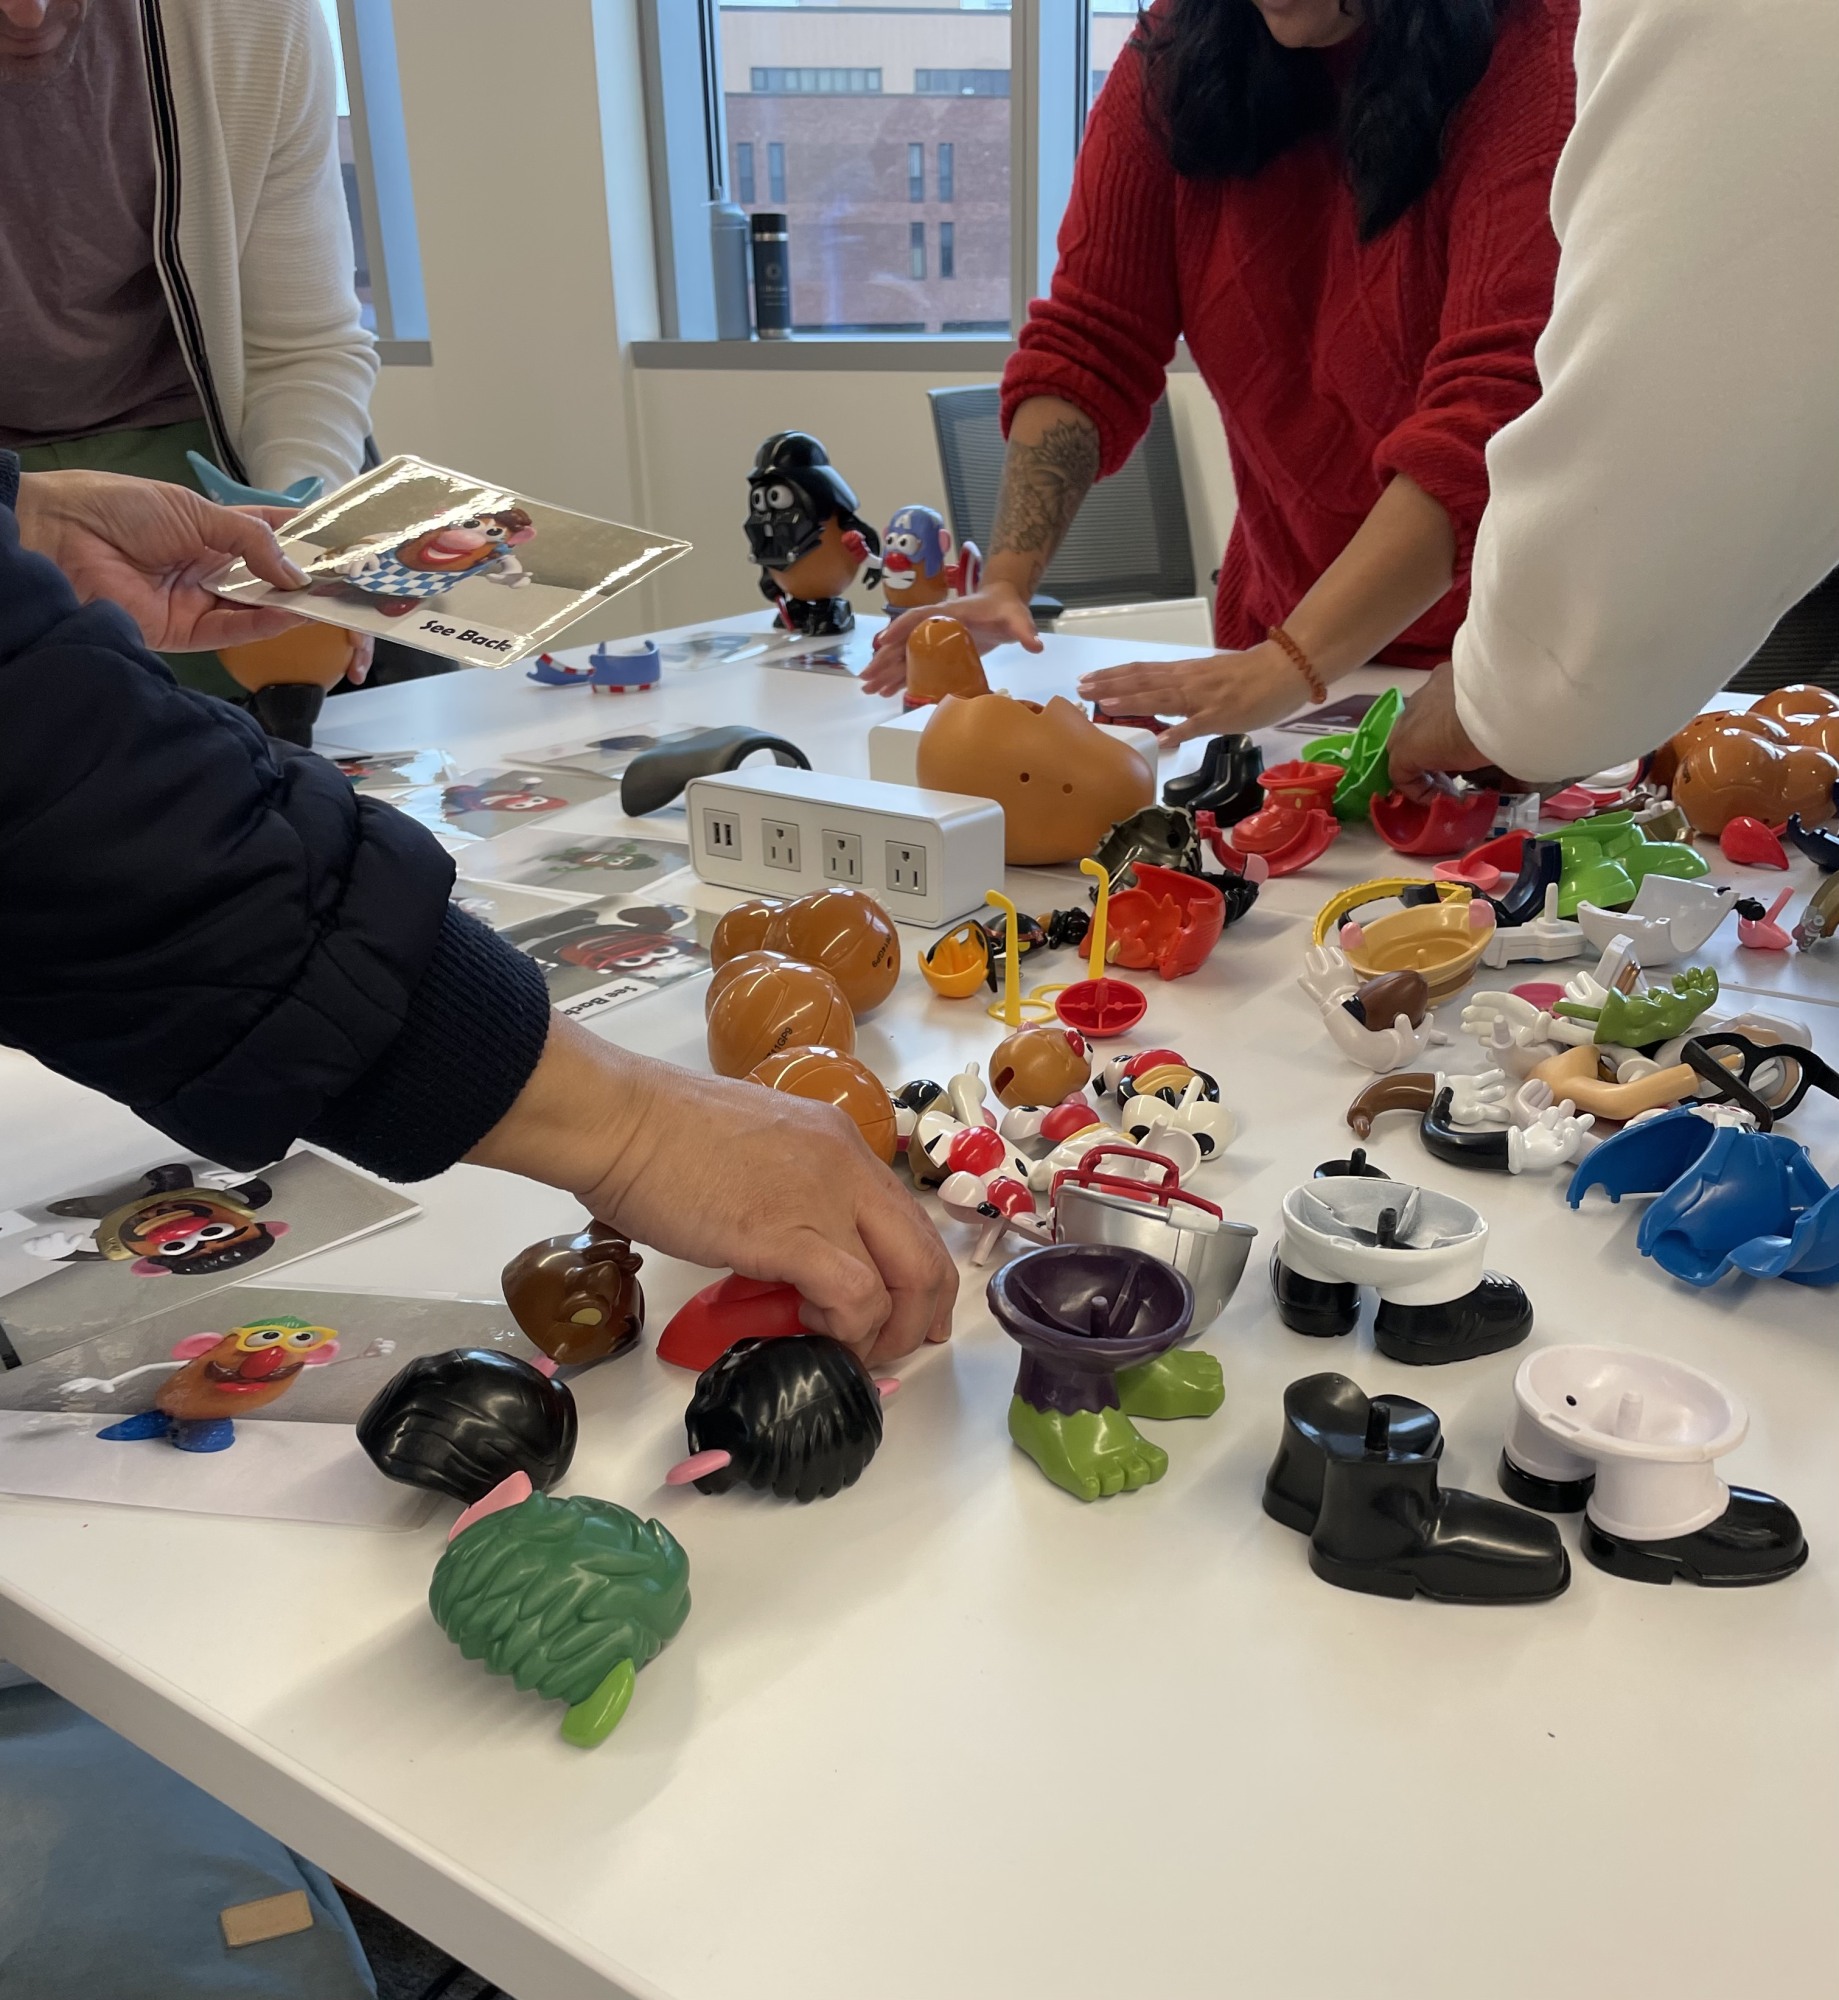 students assembling parts from many Mr. Potato Head toys